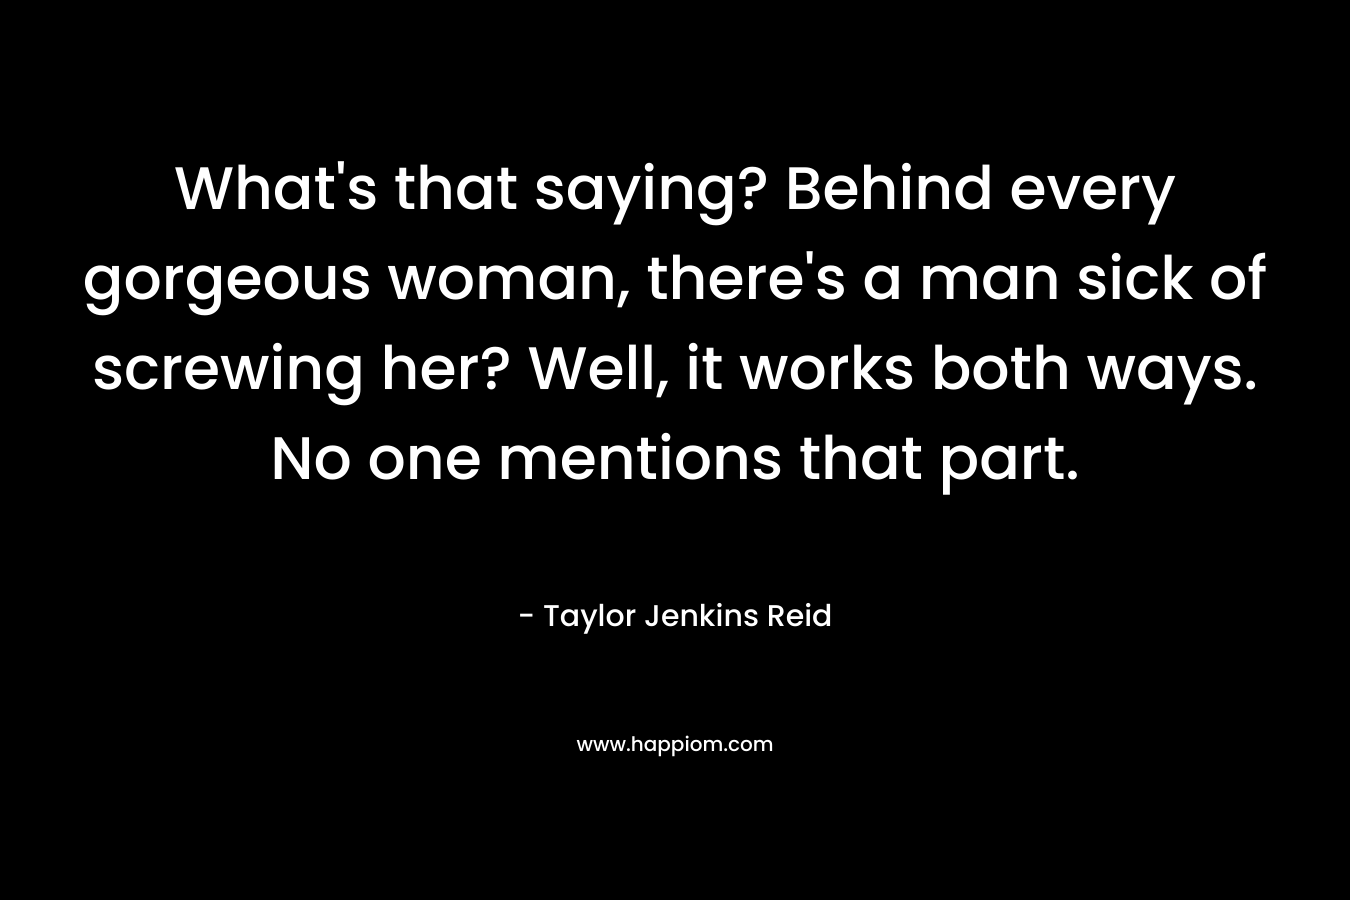 What’s that saying? Behind every gorgeous woman, there’s a man sick of screwing her? Well, it works both ways. No one mentions that part. – Taylor Jenkins Reid